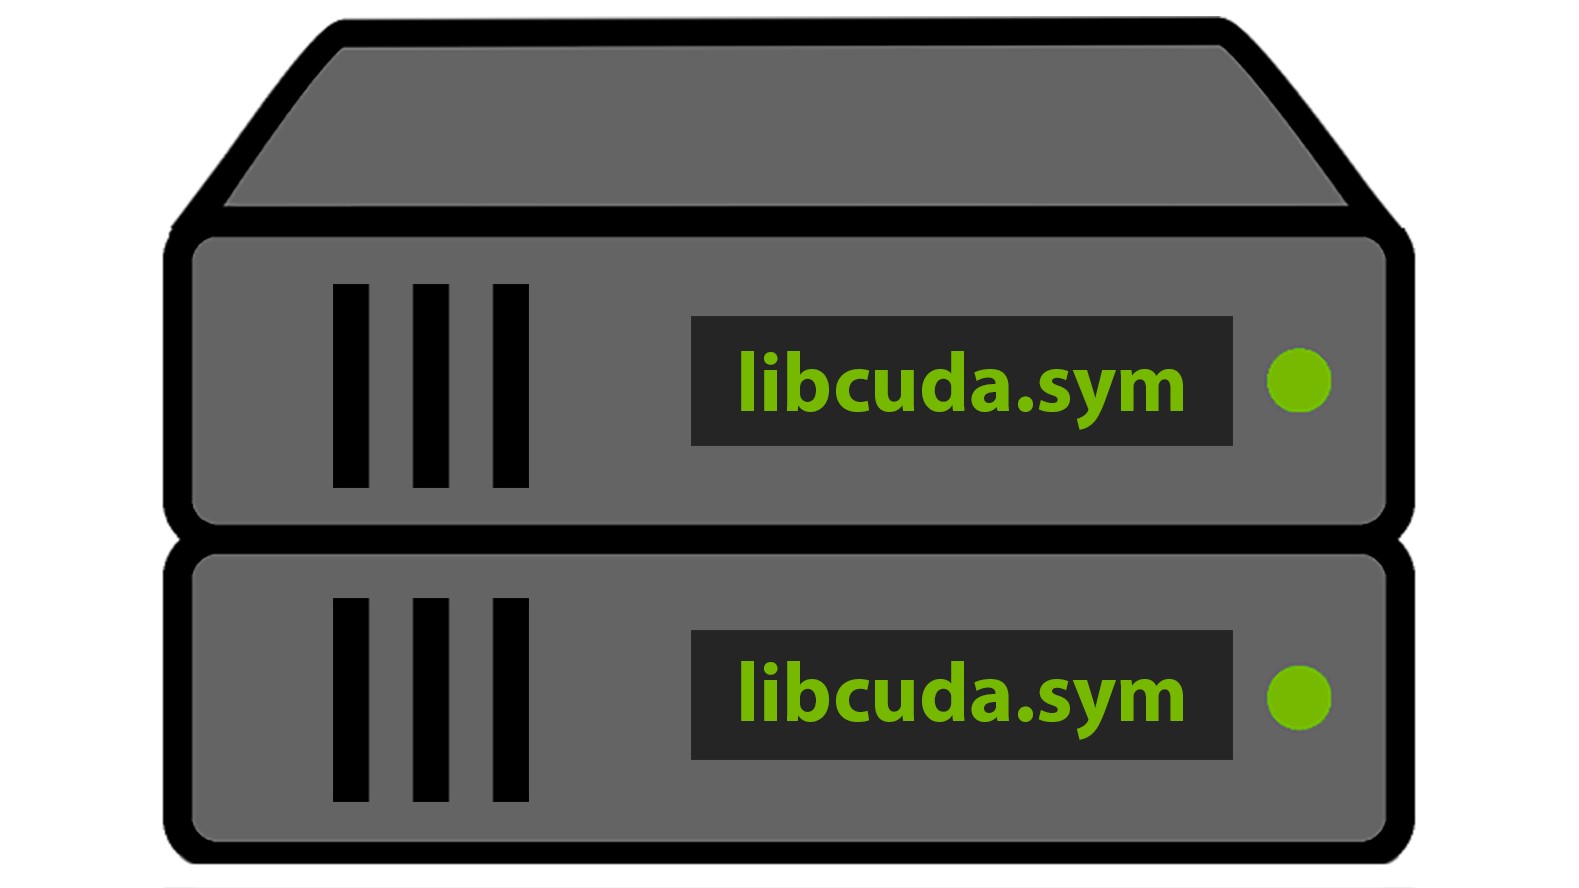 Decorative image of two boxes with libcuda.sym labels.